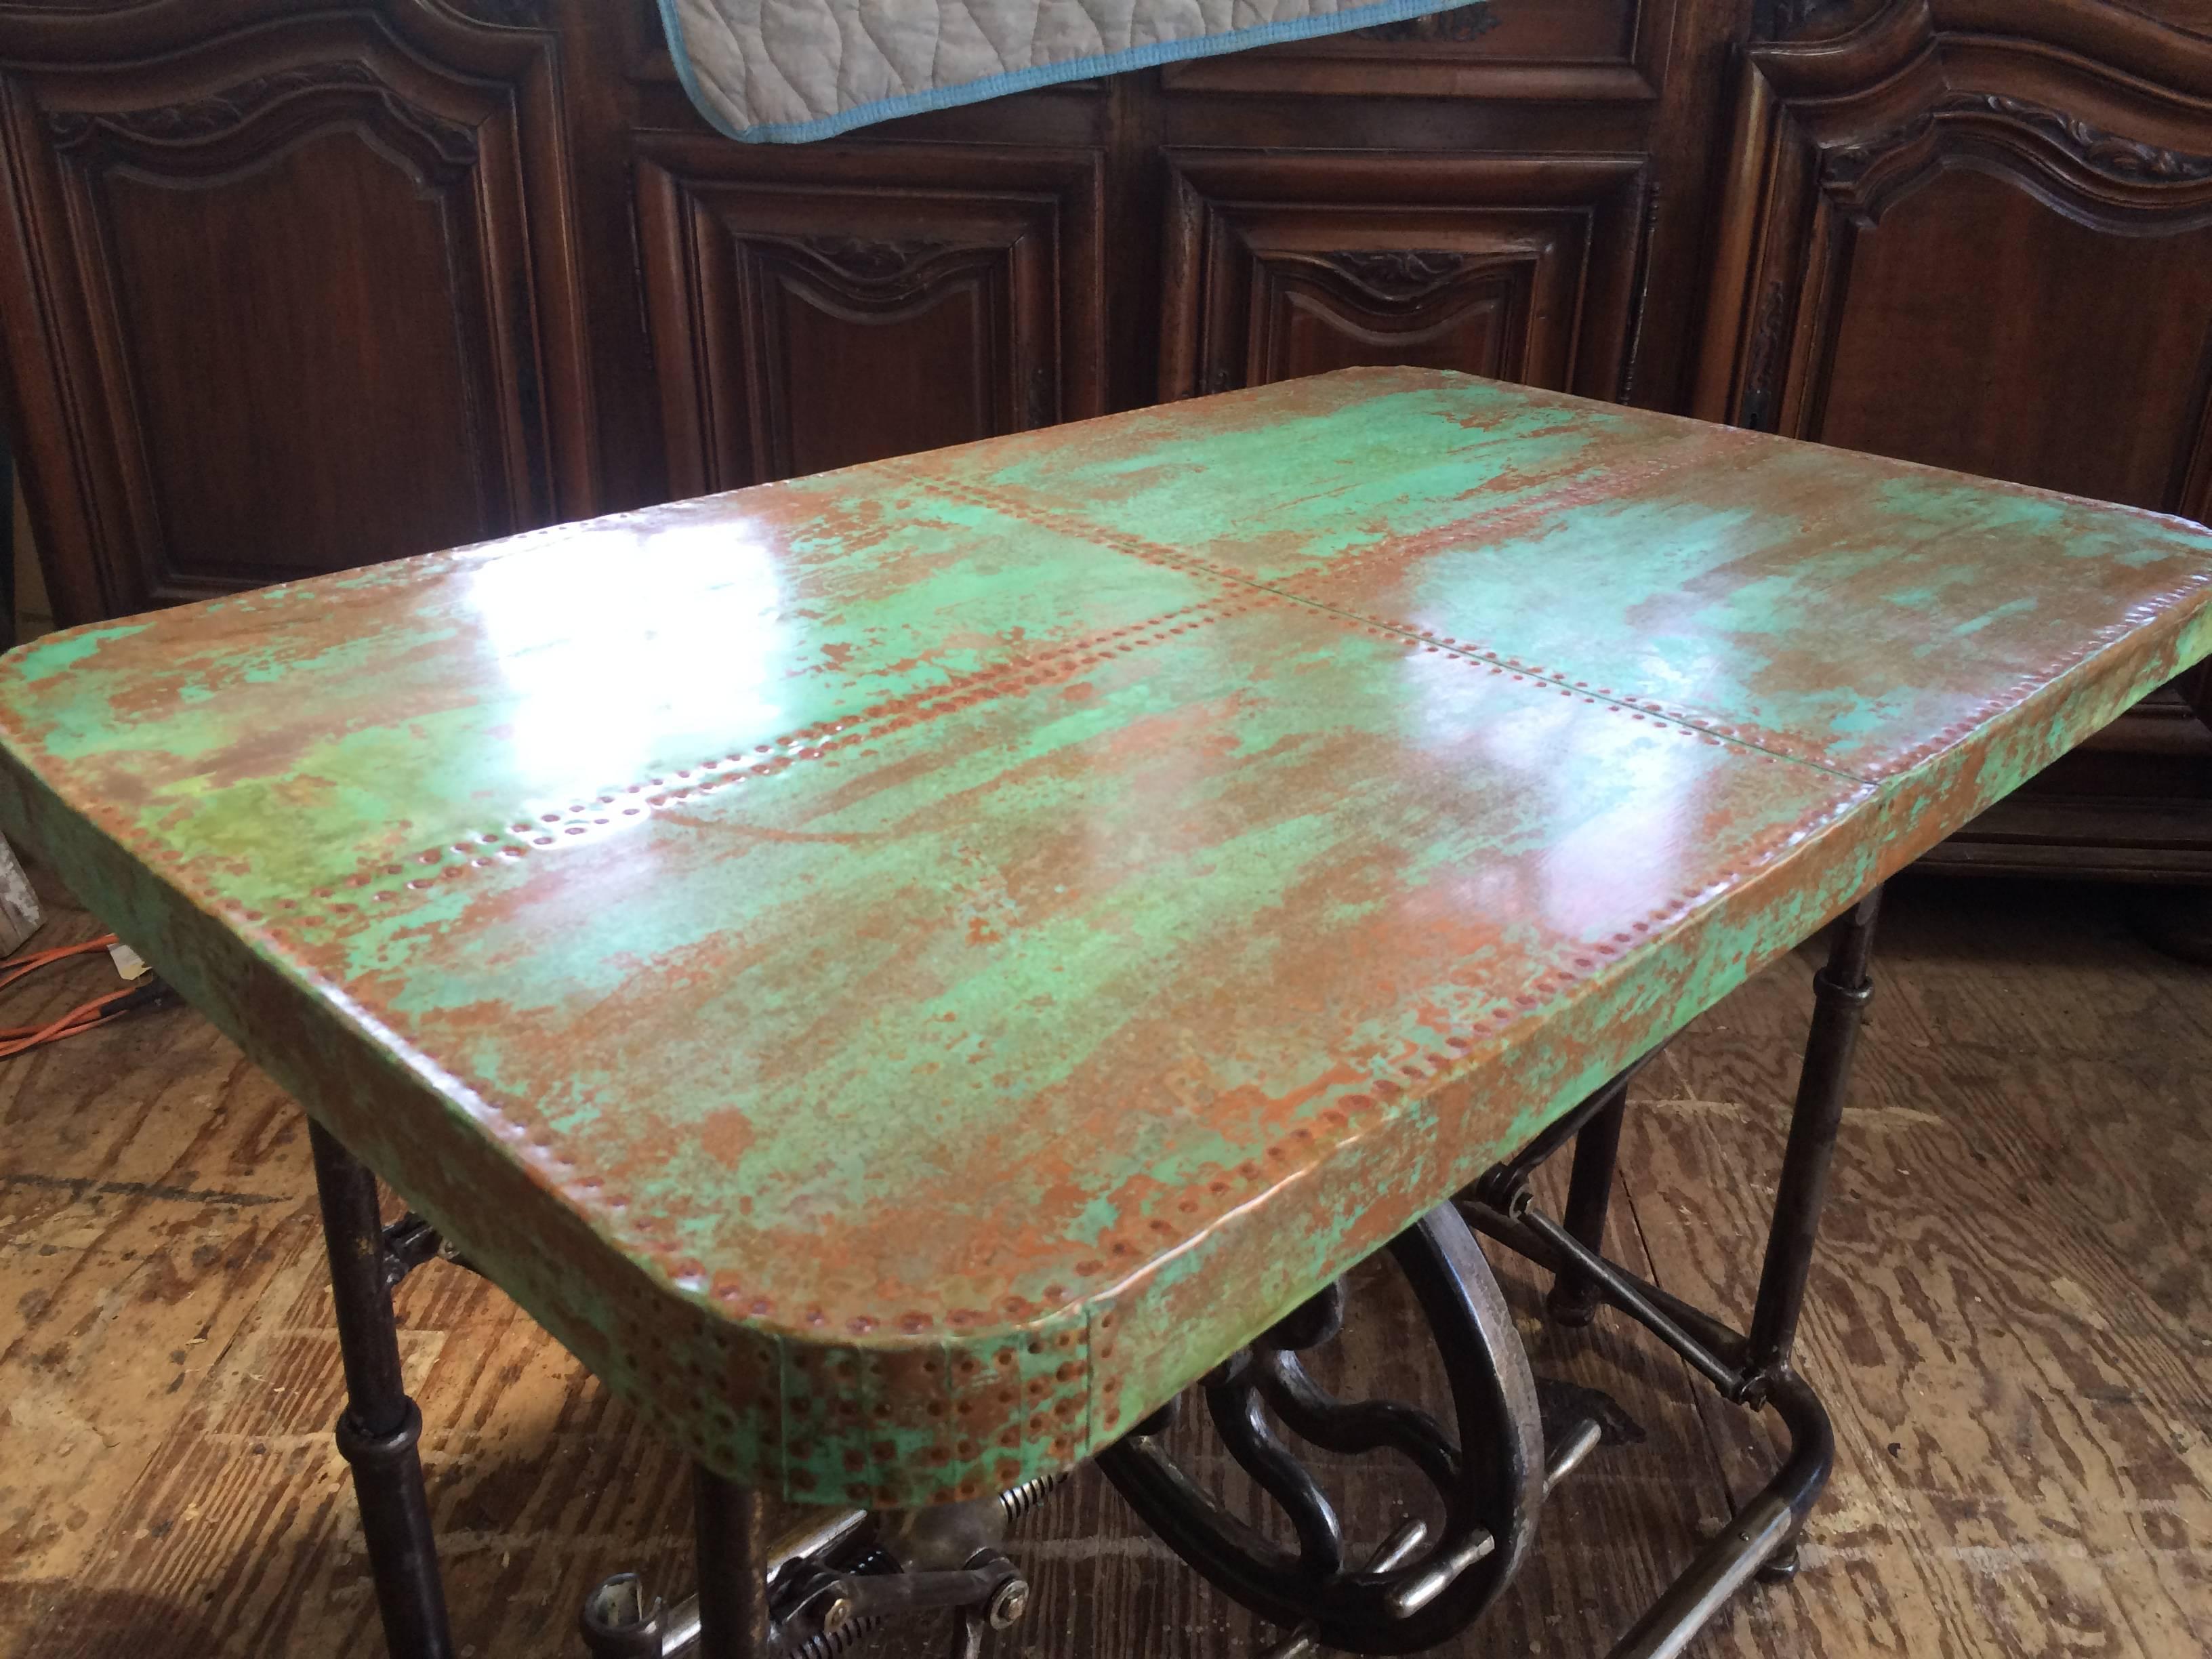 Unusual Industrial steel table with patinated copper top. Made of steel with a geared and fly wheeled mechanism to raise and lower the top. This can be used as a coffee table, dining table, bar, or sofa table. Mechanical base made in Pennsylvania,